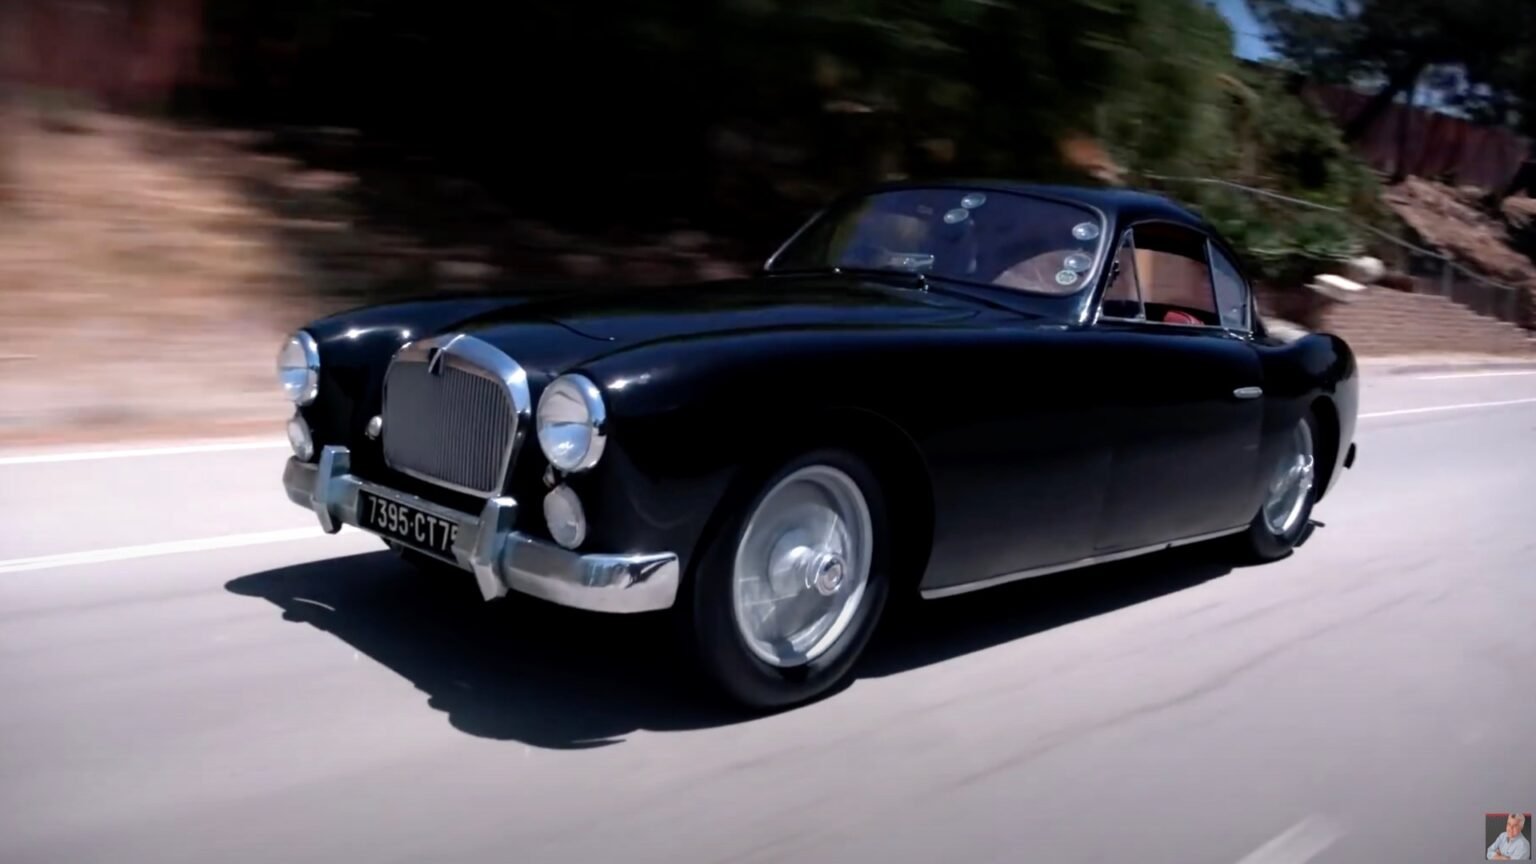 Jay-Leno-drives-a-Talbot-Lago-that-was-lost-for-nearly-1536x864.jpg